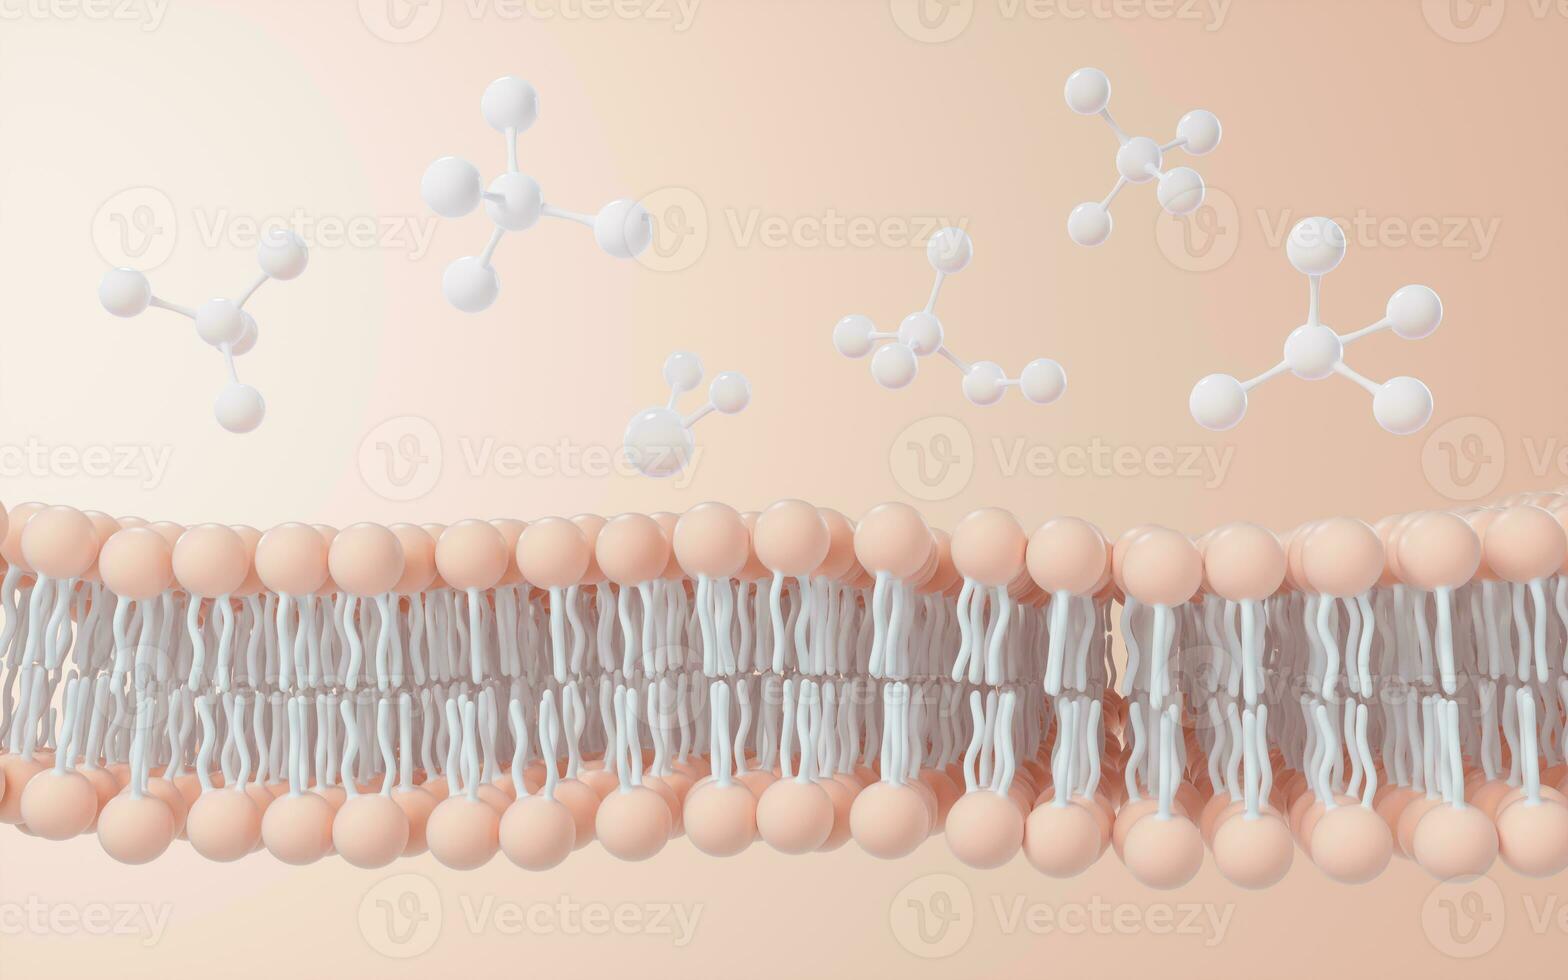 Cell membrane structure background, 3d rendering. photo